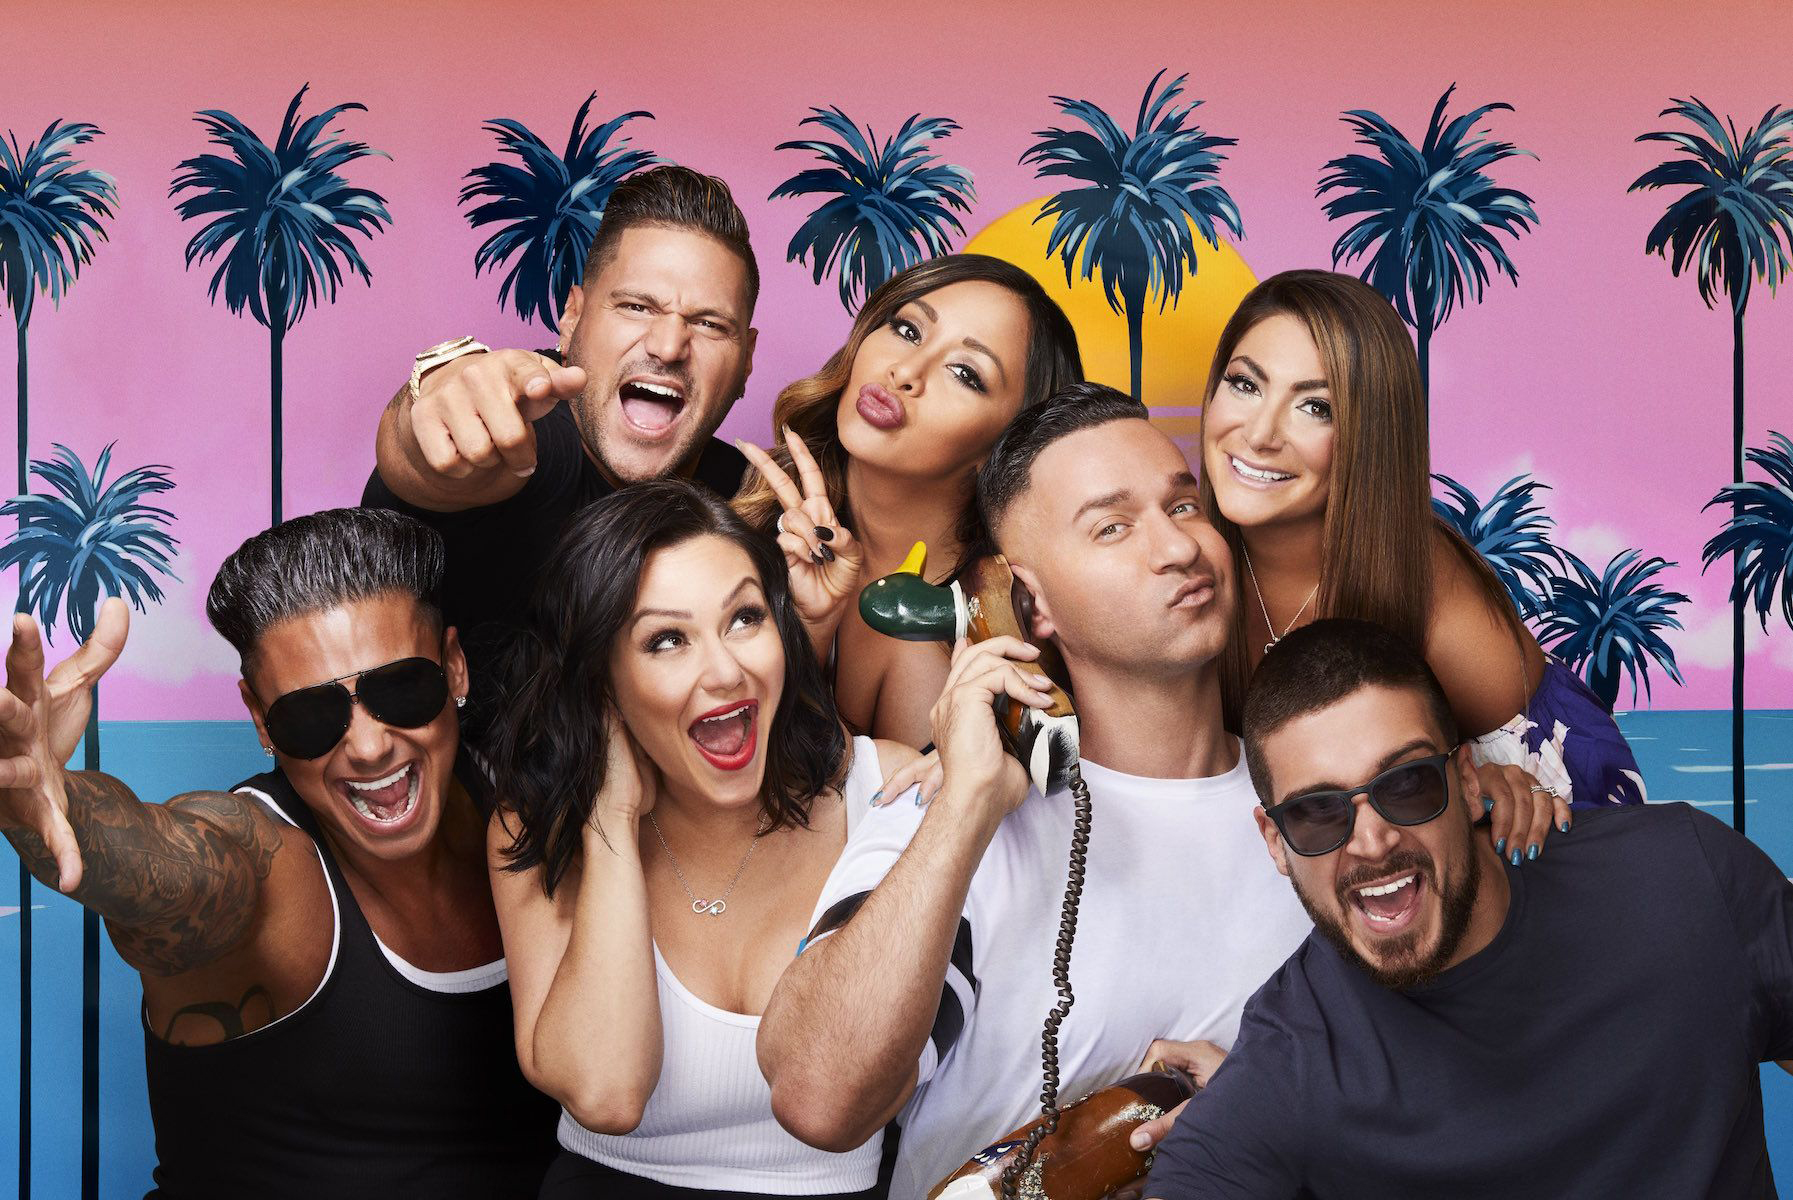 Who is mike from jersey shore dating 2014 ‘Jersey Shore’ Mike The